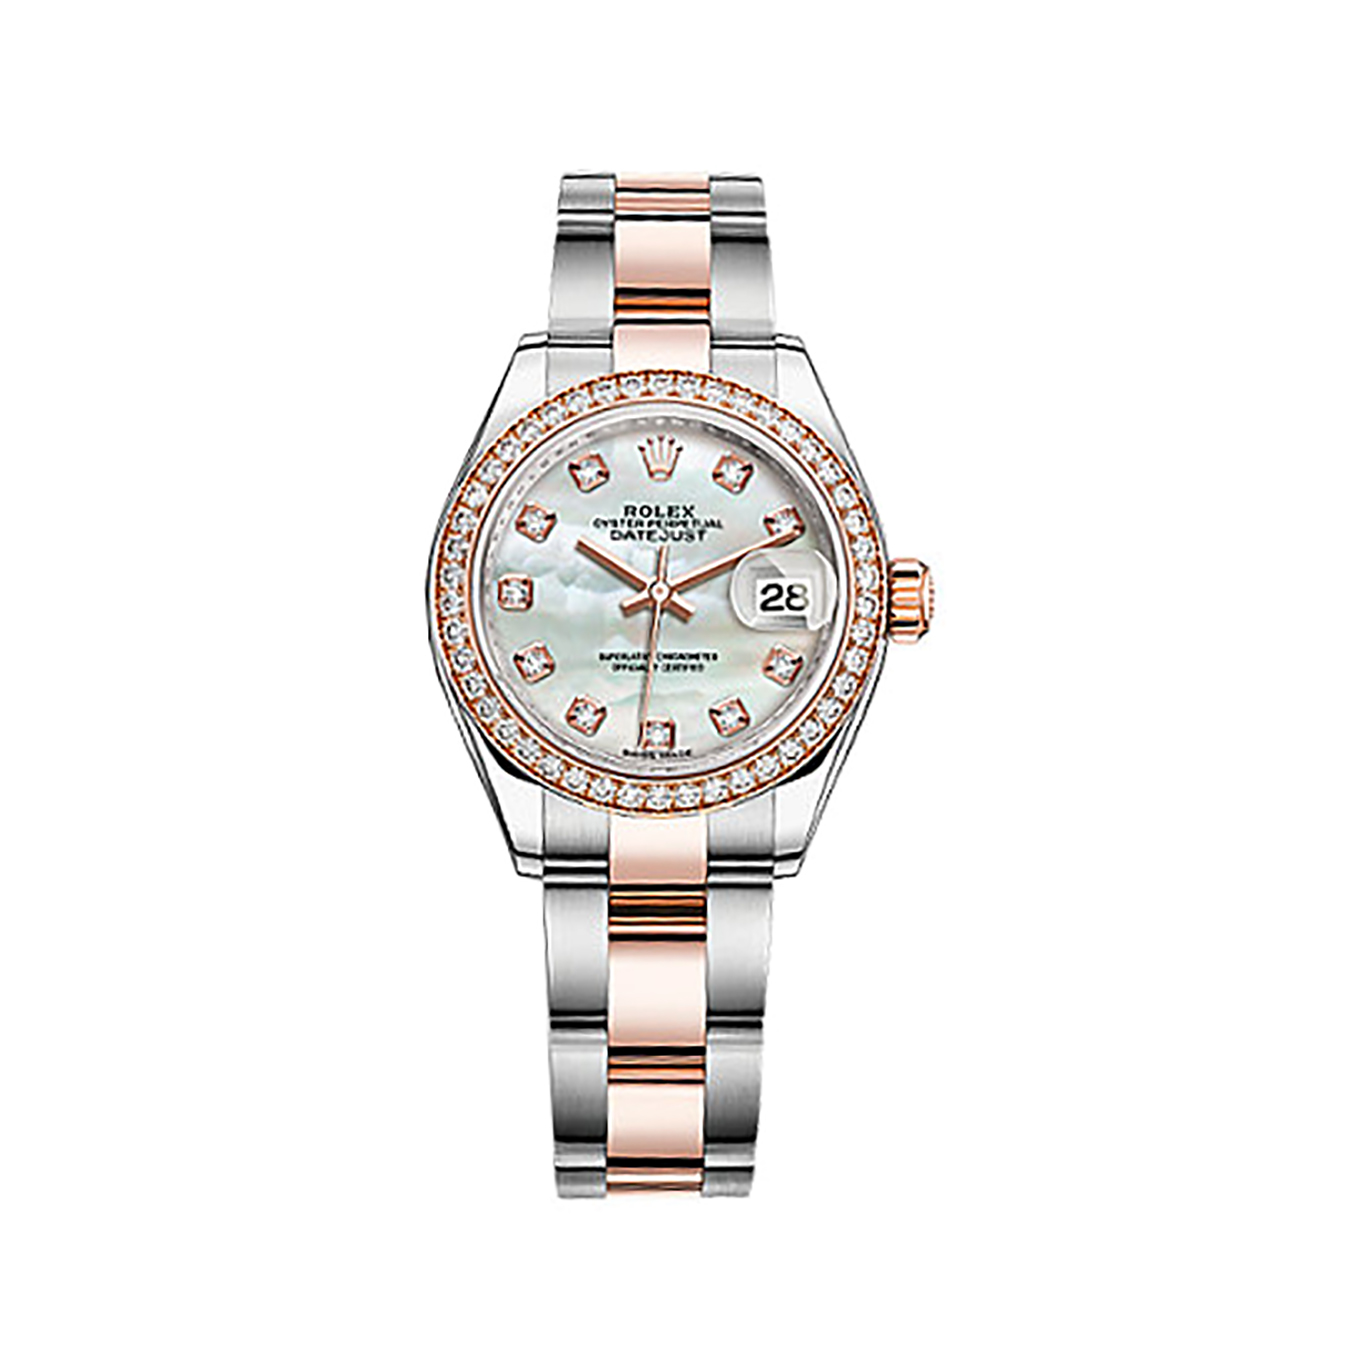 Lady-Datejust 28 279381RBR Rose Gold & Stainless Steel & Diamonds Watch (White Mother-of-pearl Set with Diamonds)